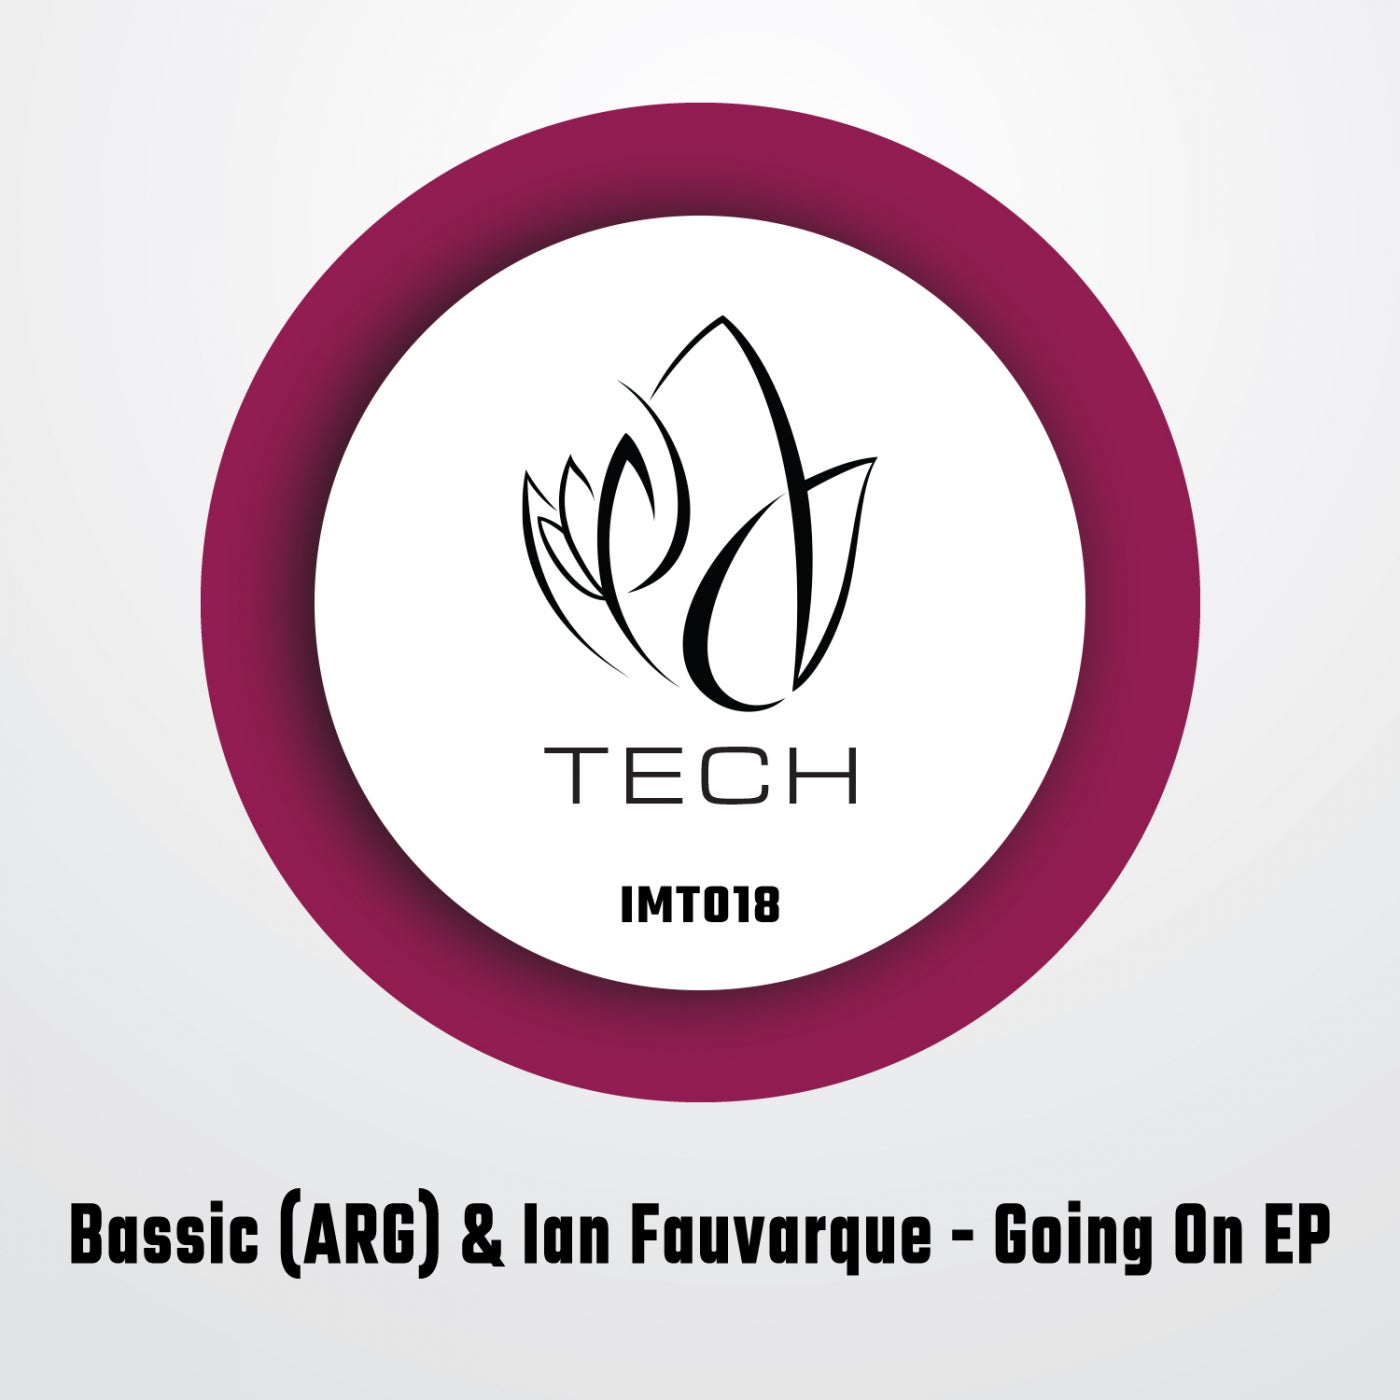 Bassic (ARG), Ian Fauvarque - Going On EP [IMT018]